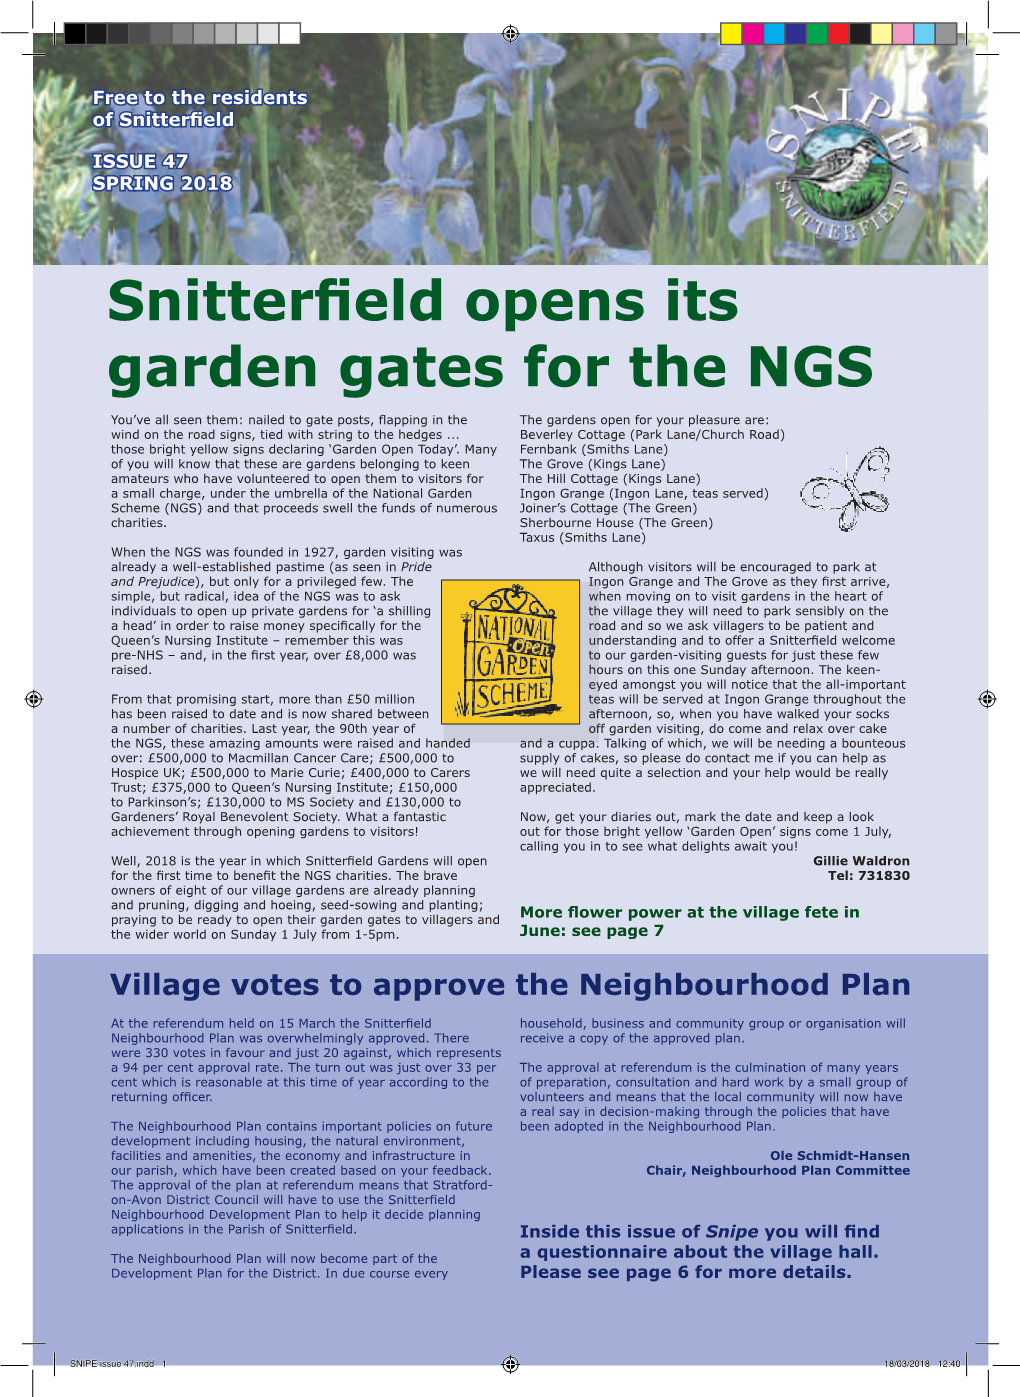 Snitterfield Opens Its Garden Gates for the NGS